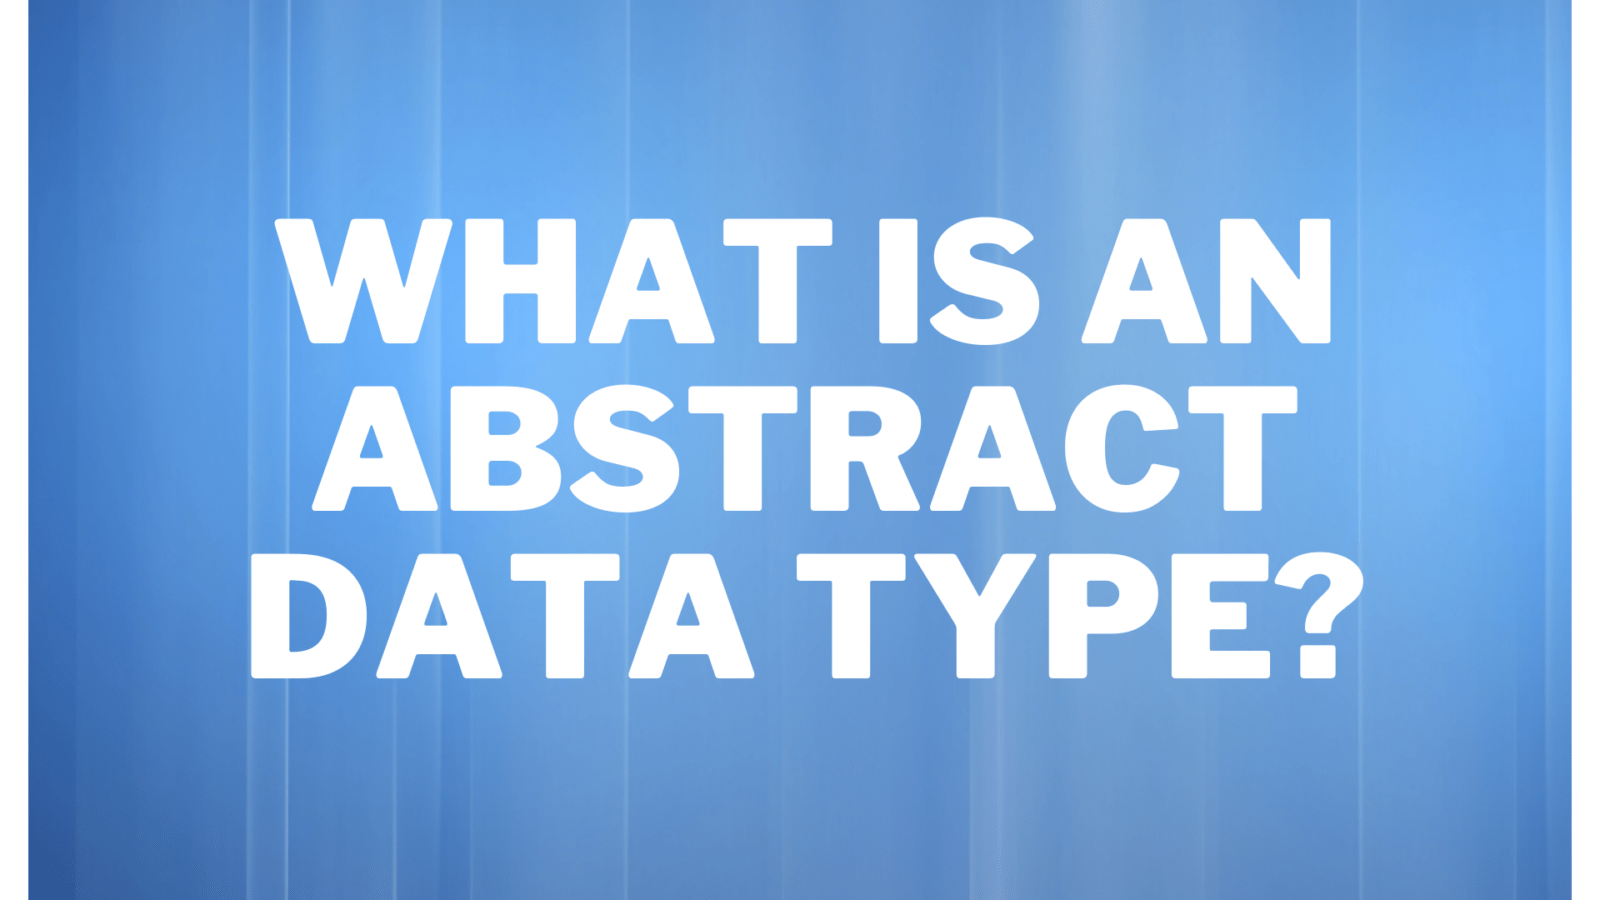 Abstract Data Type ADT